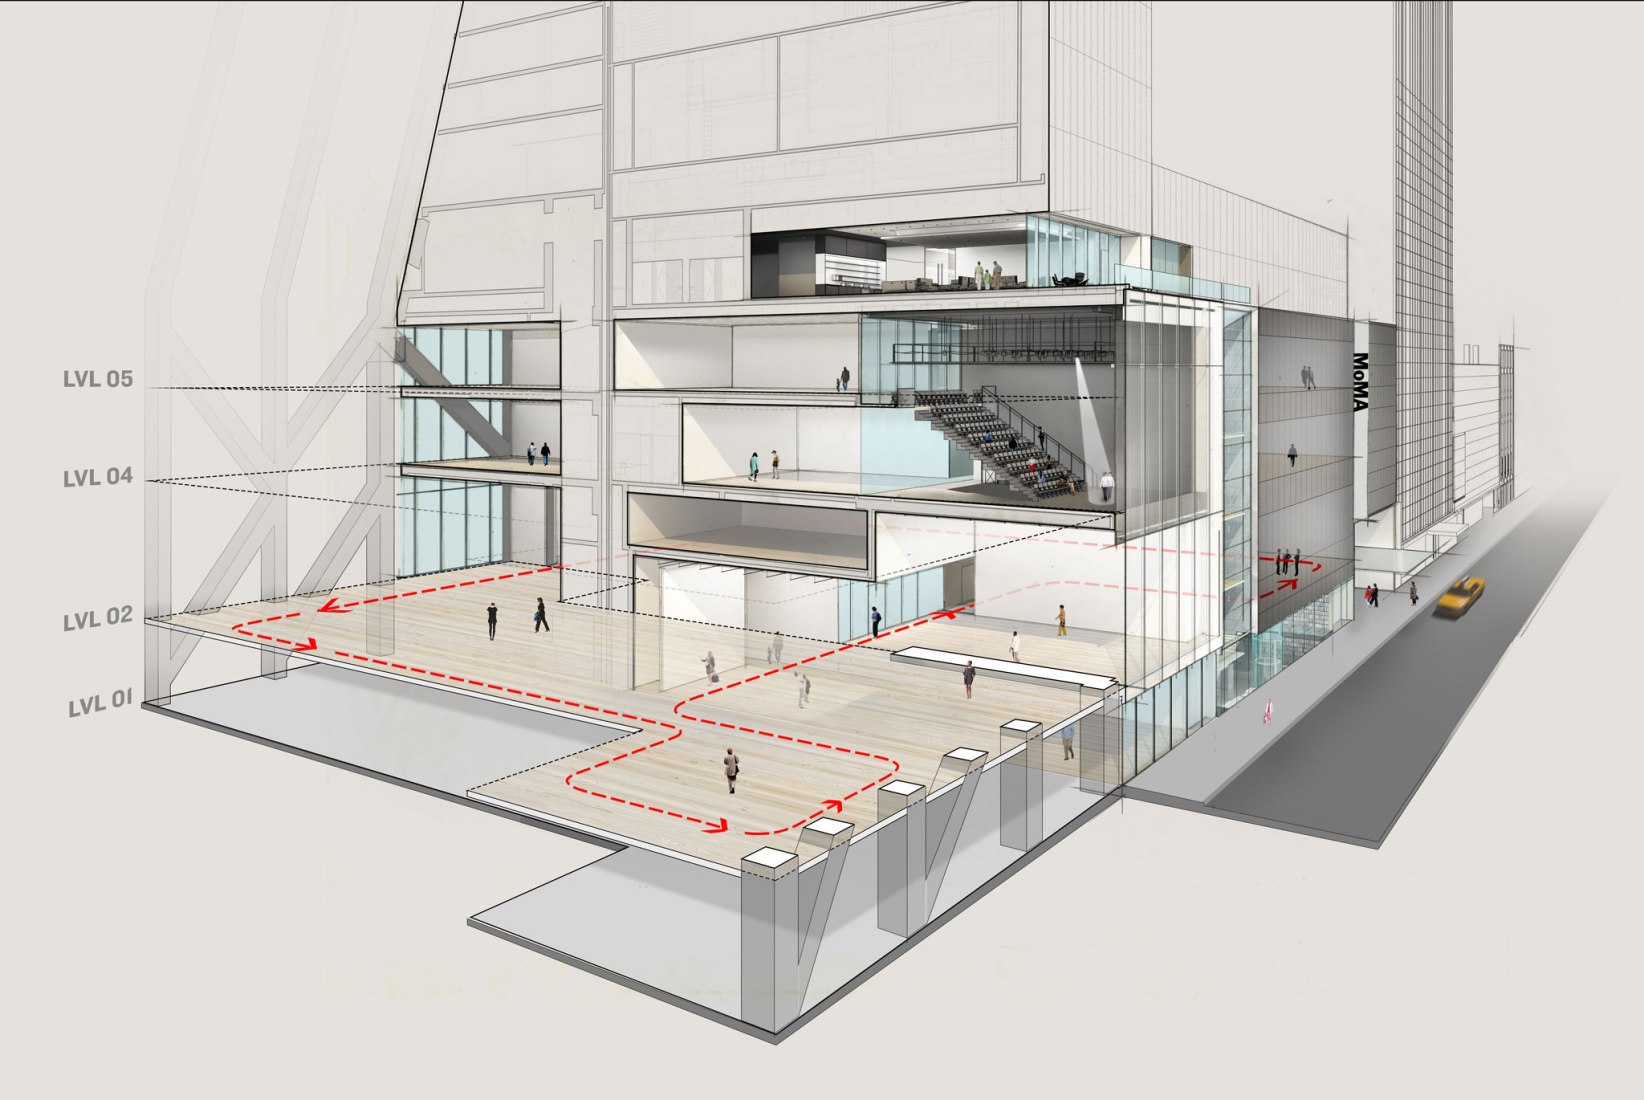 MoMA. 1st Step Renovation and Project by Diller Scofidio + Renfro | Strength of Architecture | From 1998